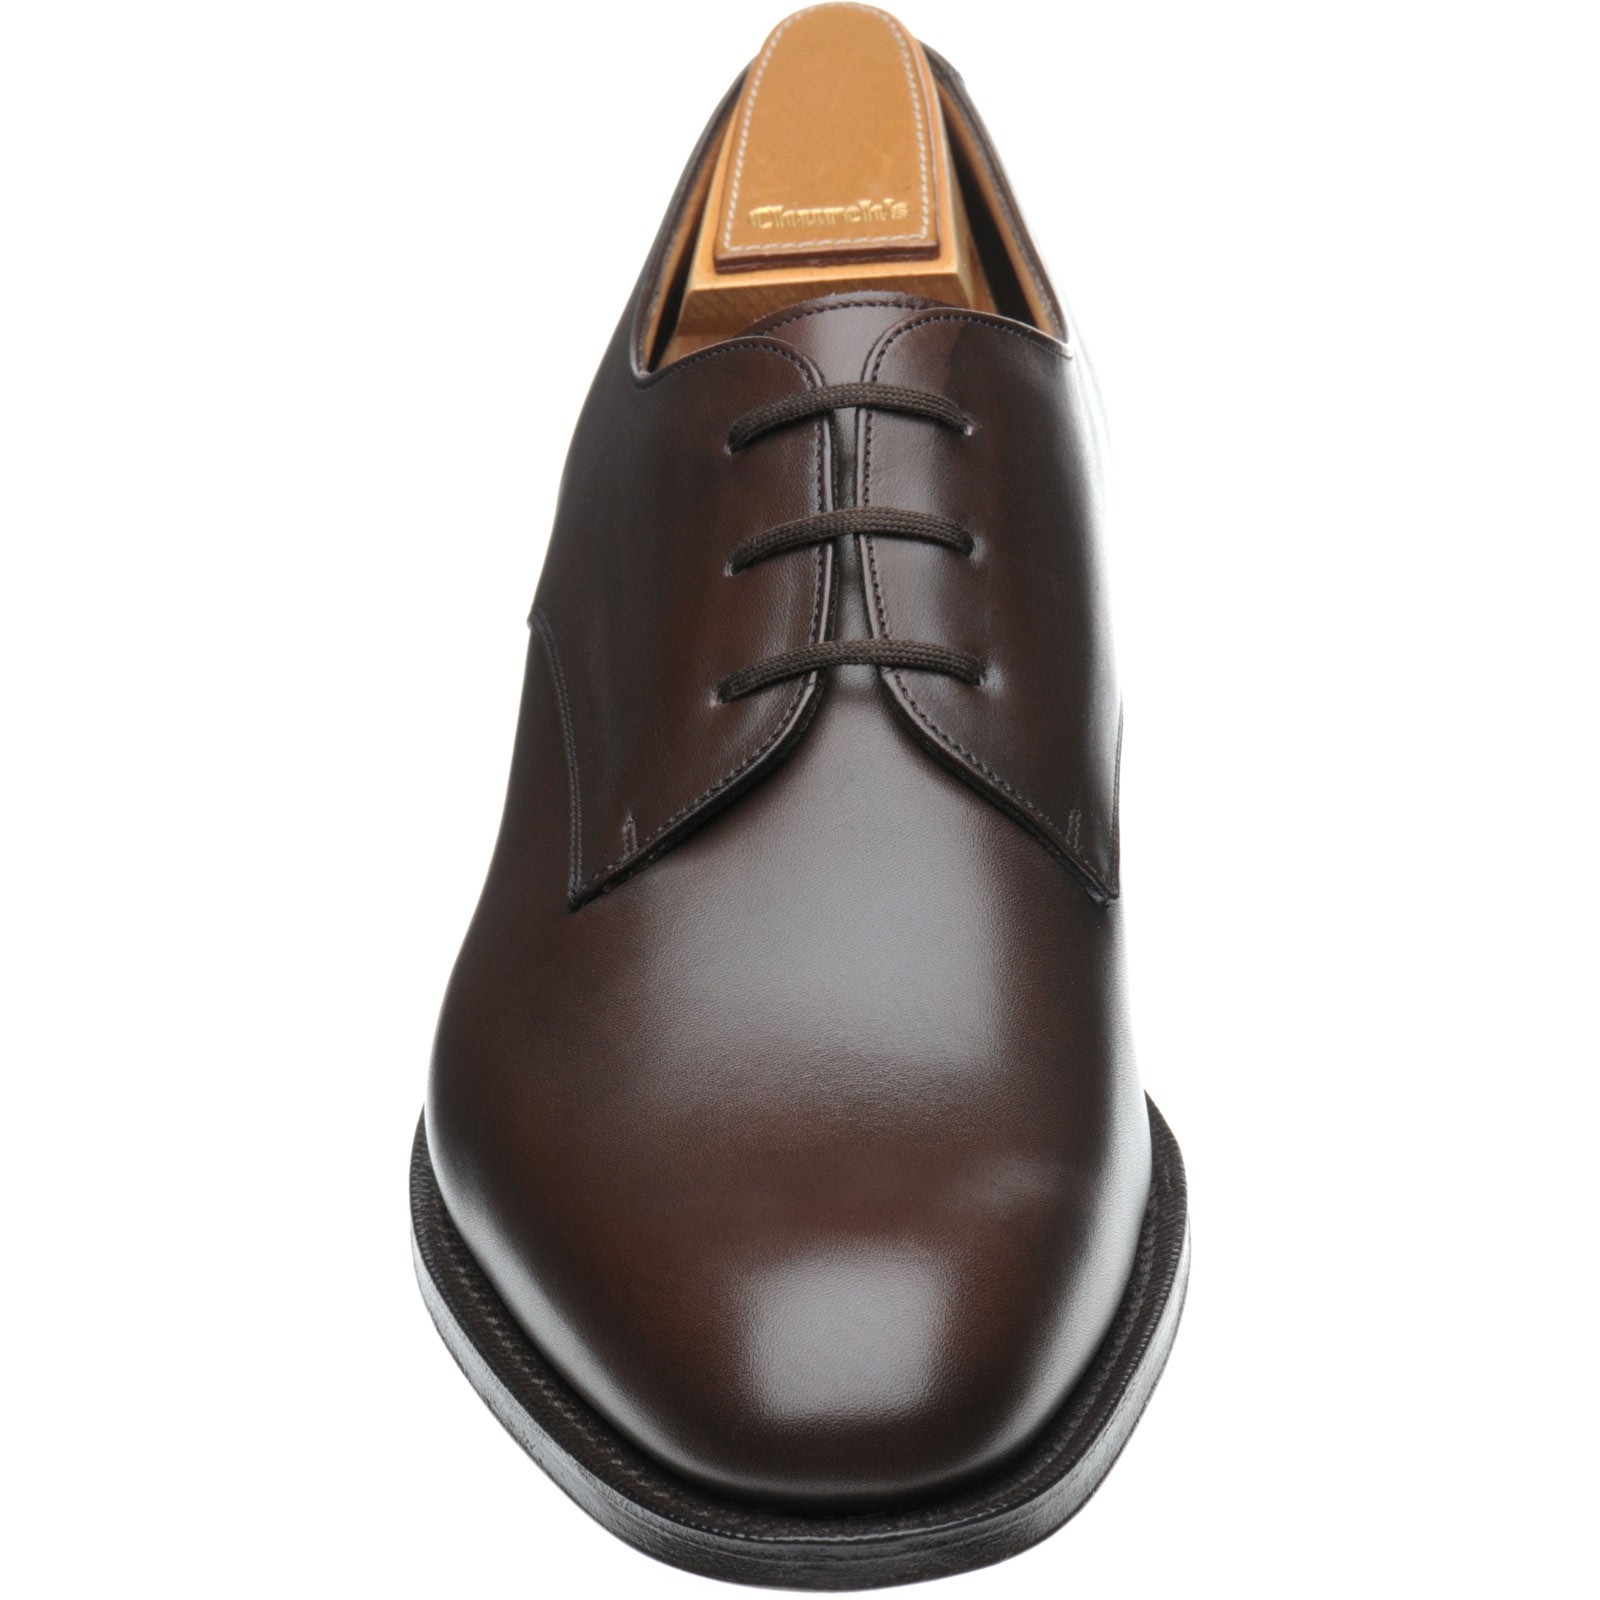 Church shoes | Church Office | Oslo Derby shoes in Ebony Calf at ...